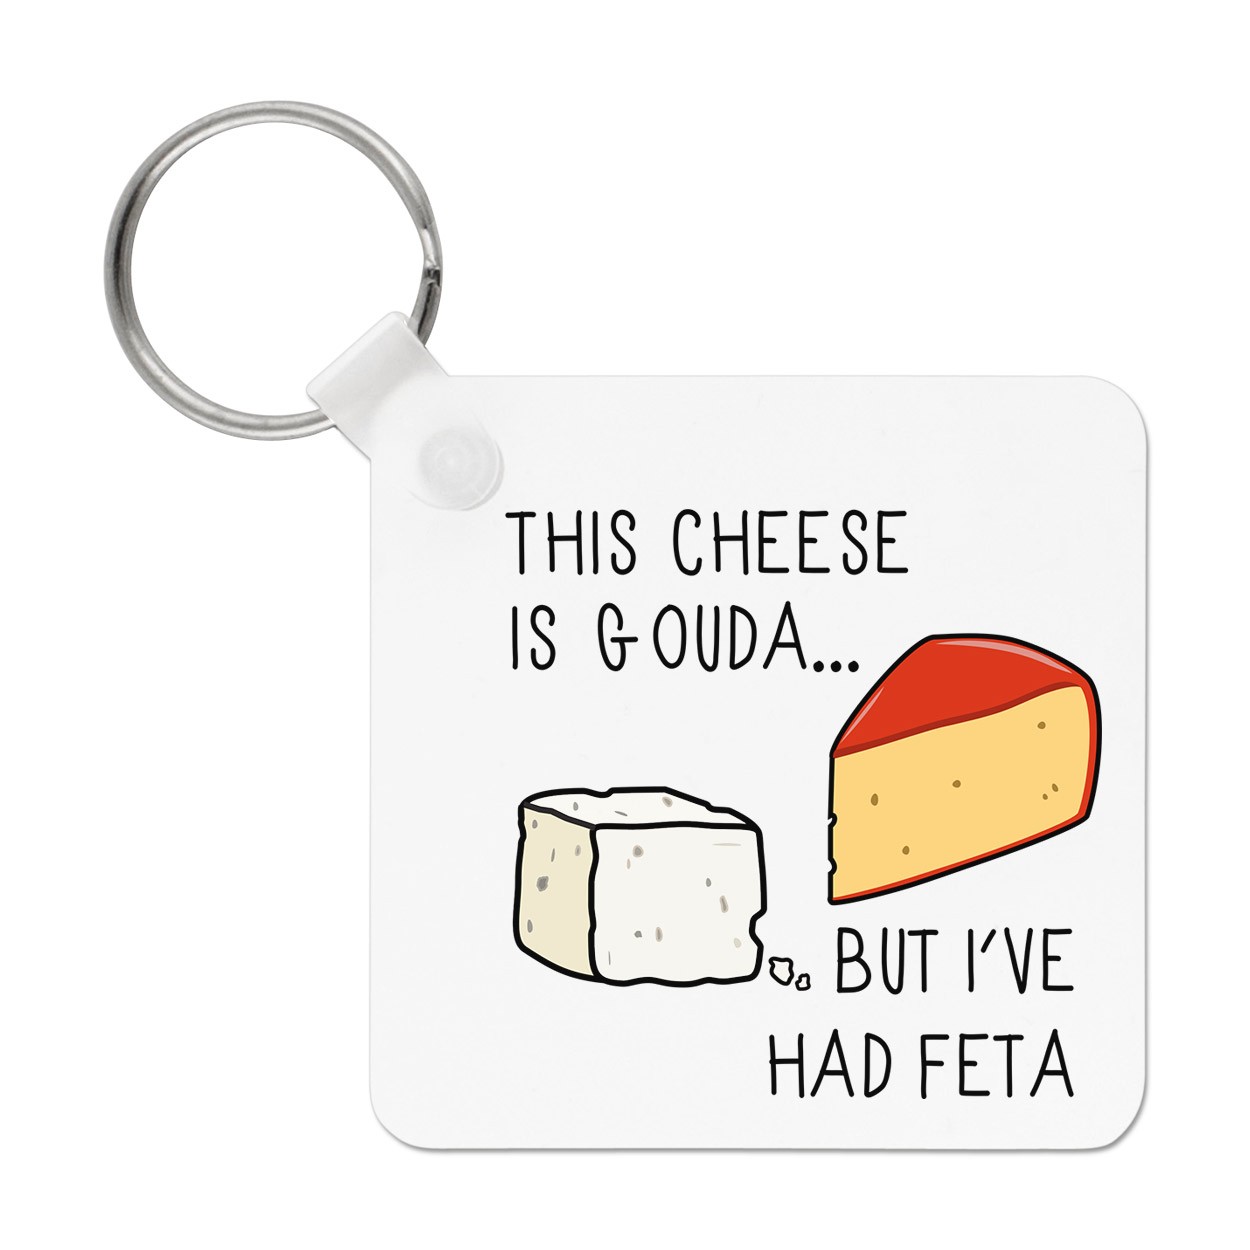 This Cheese Is Gouda But I've Had Feta Keyring Key Chain